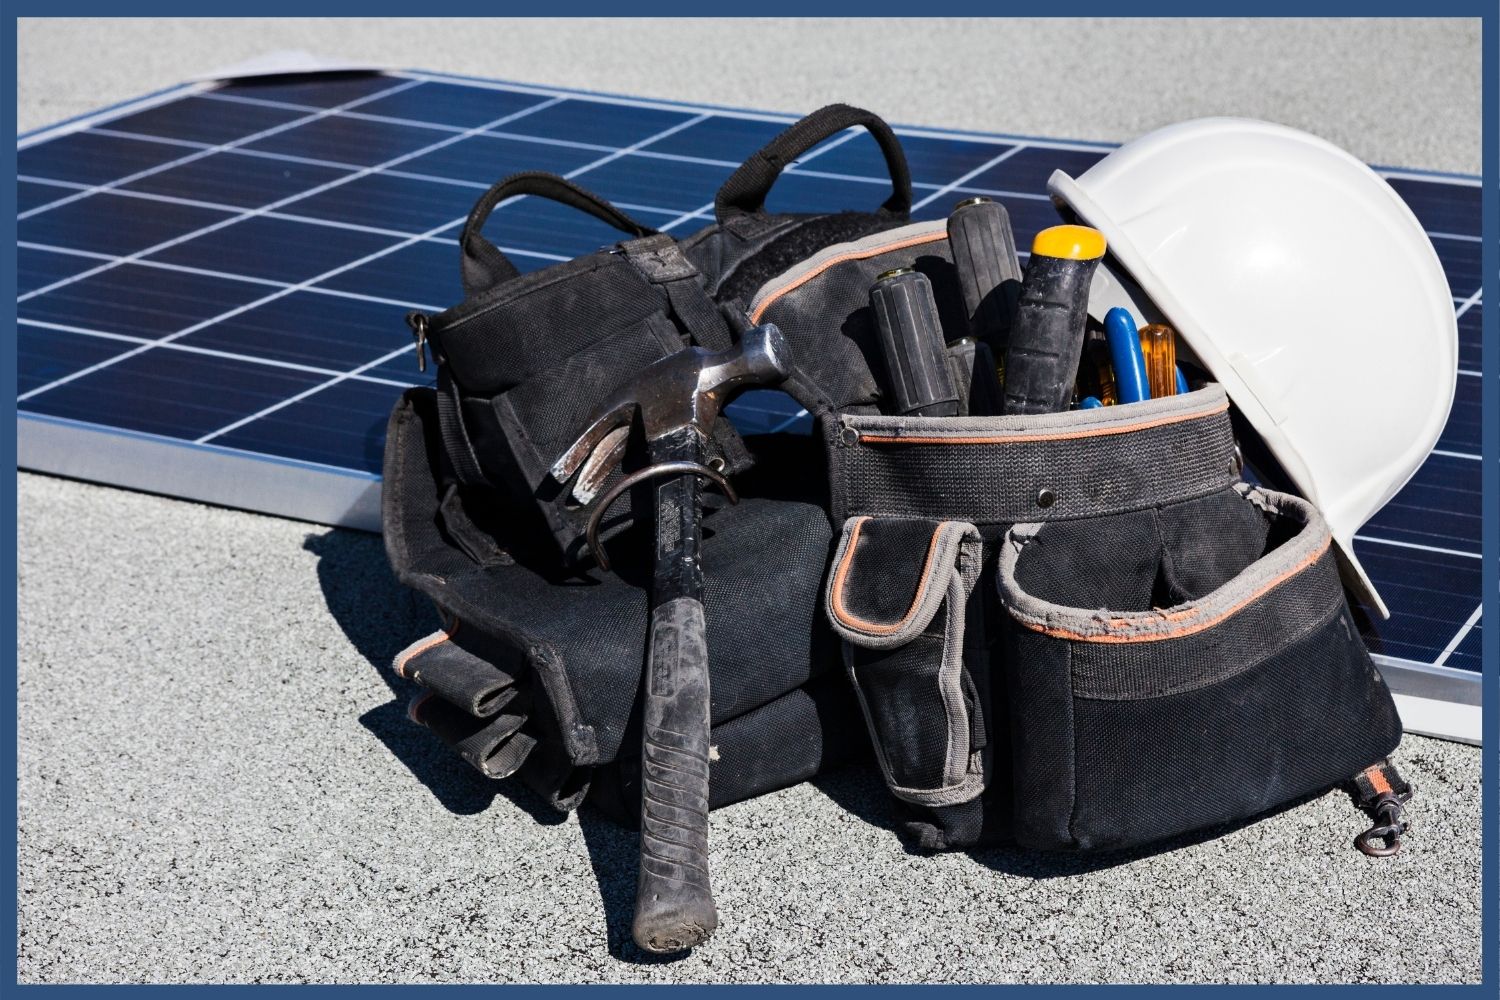 View the Solar Toolkit